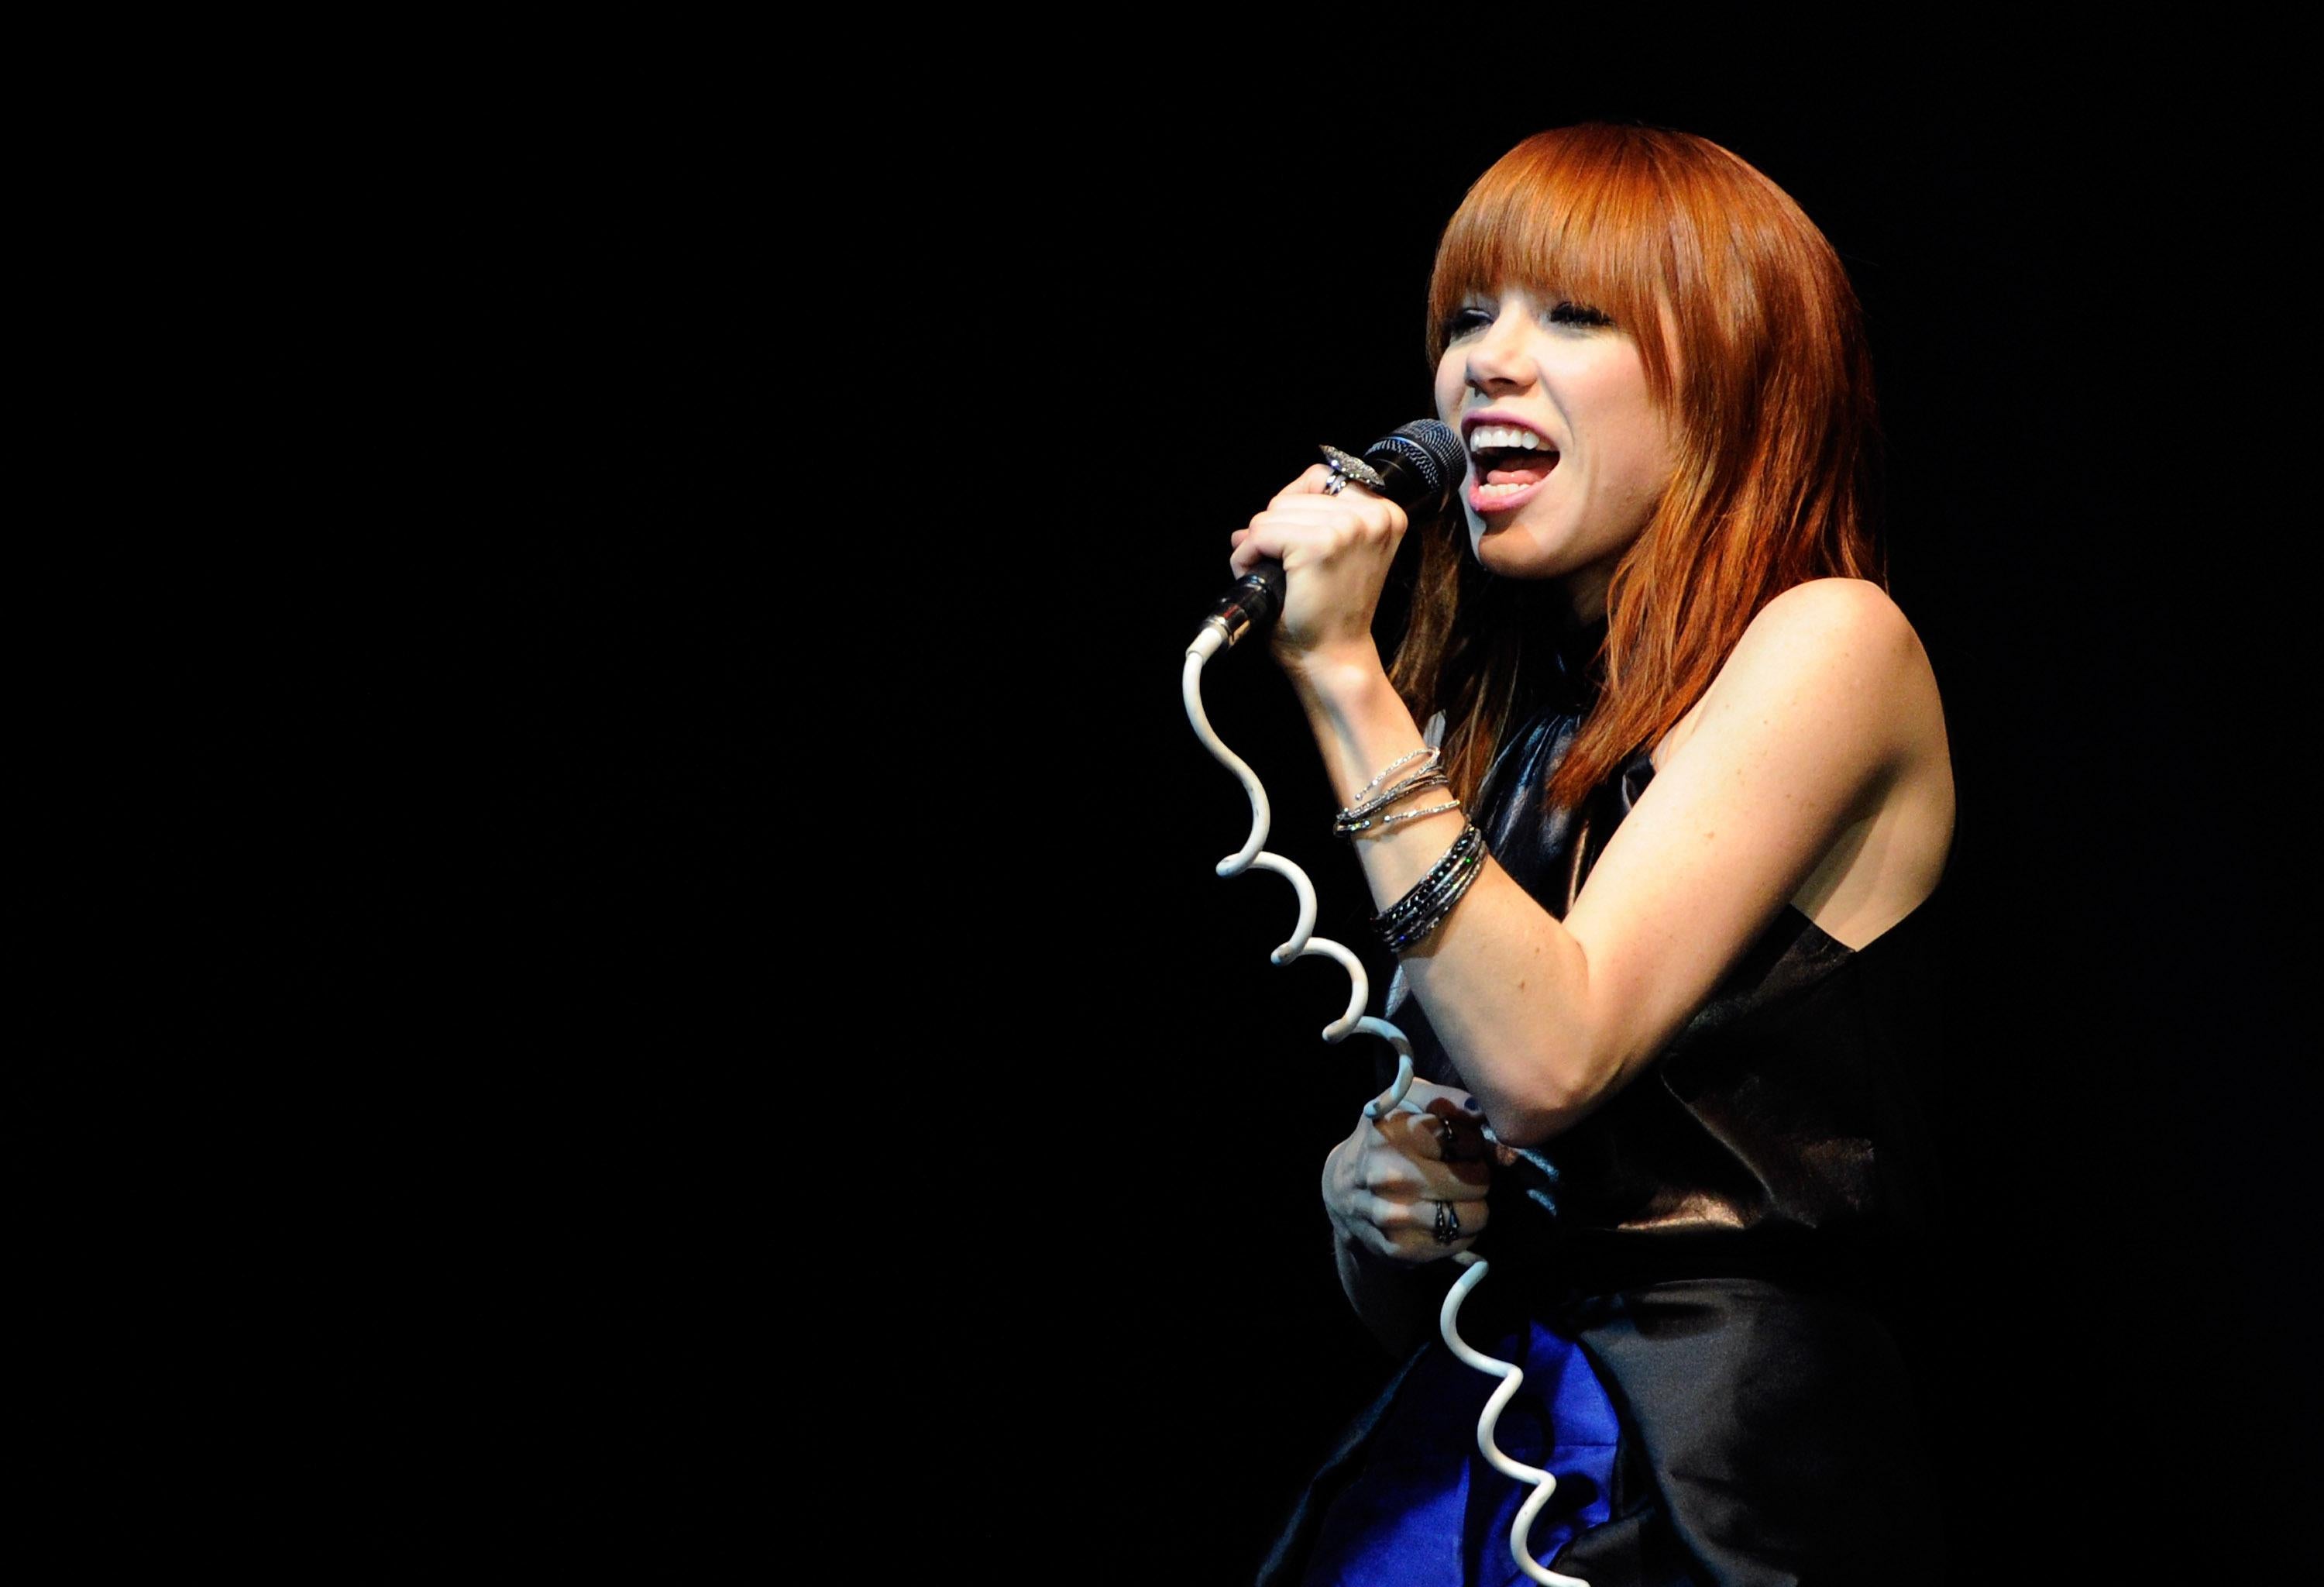 Carly Rae Jepsen Releases I Really Like You Hear The Call Me Maybe Singer S First Single In Three Years